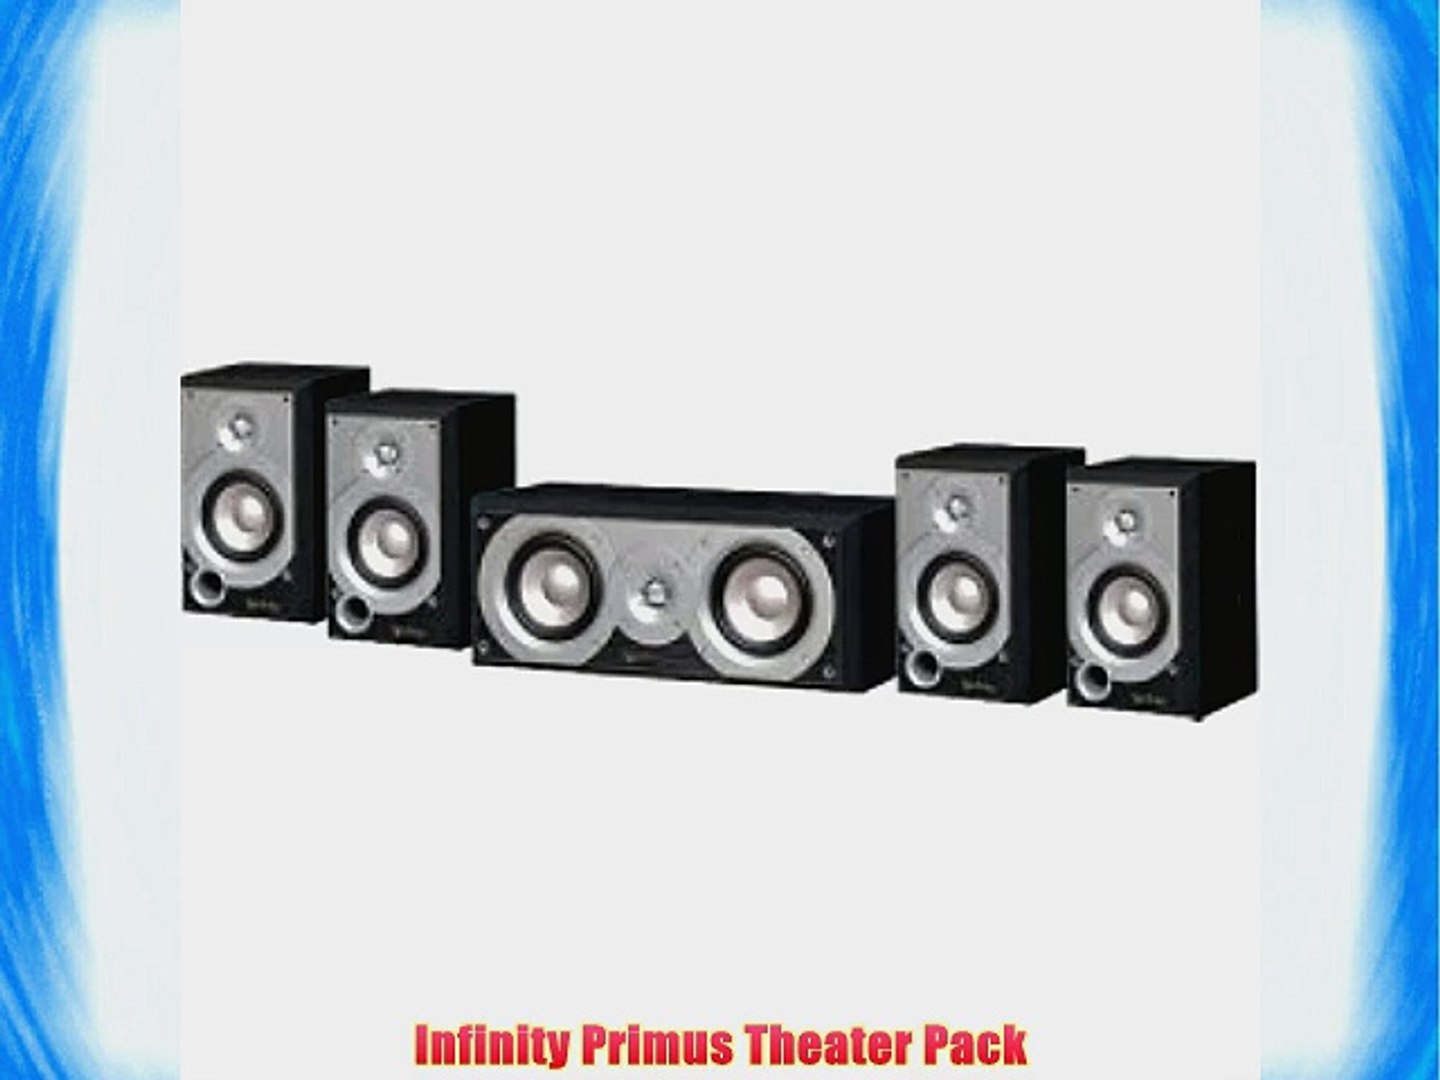 Infinity Primus Theater Pack Video Dailymotion